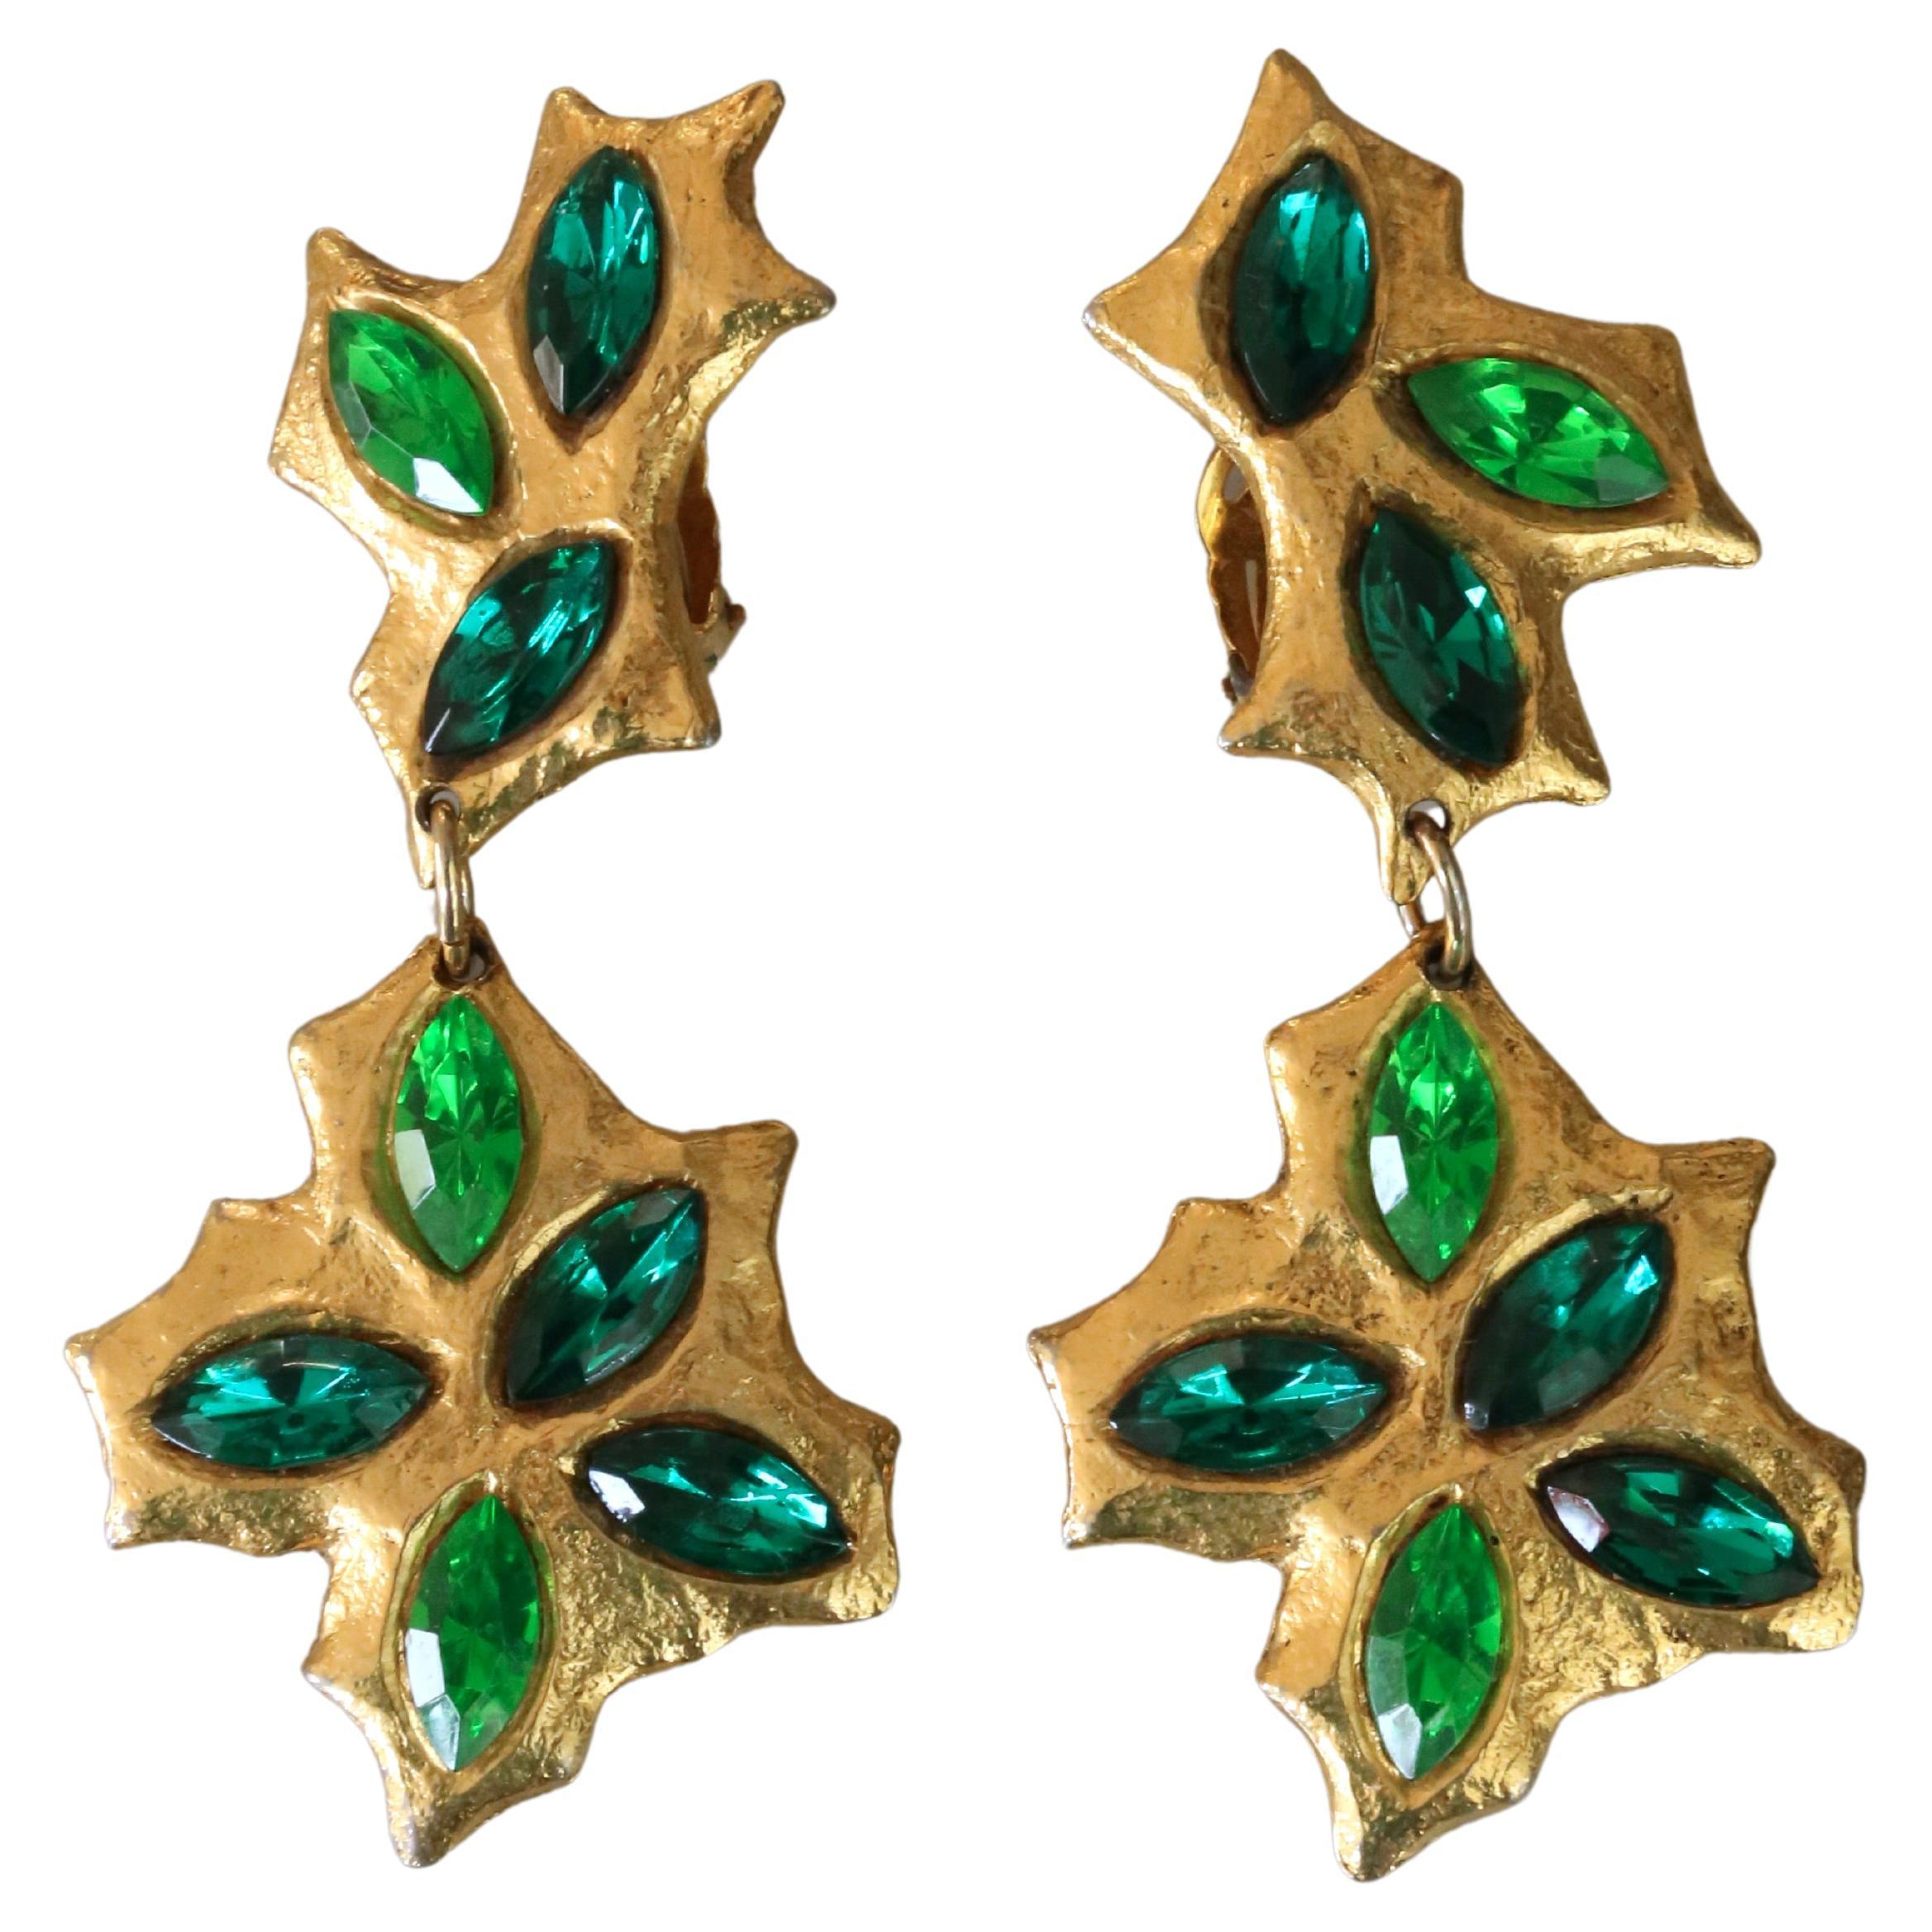 Superb vintage long clips earrings from French designer Carole Saint Germes who created for the fashion shows of the Givenchy couturiers, Feraud, Ungaro, and Jean Charles de Castelbajac. Earrings are gold plated and feature a lighter and darker tone